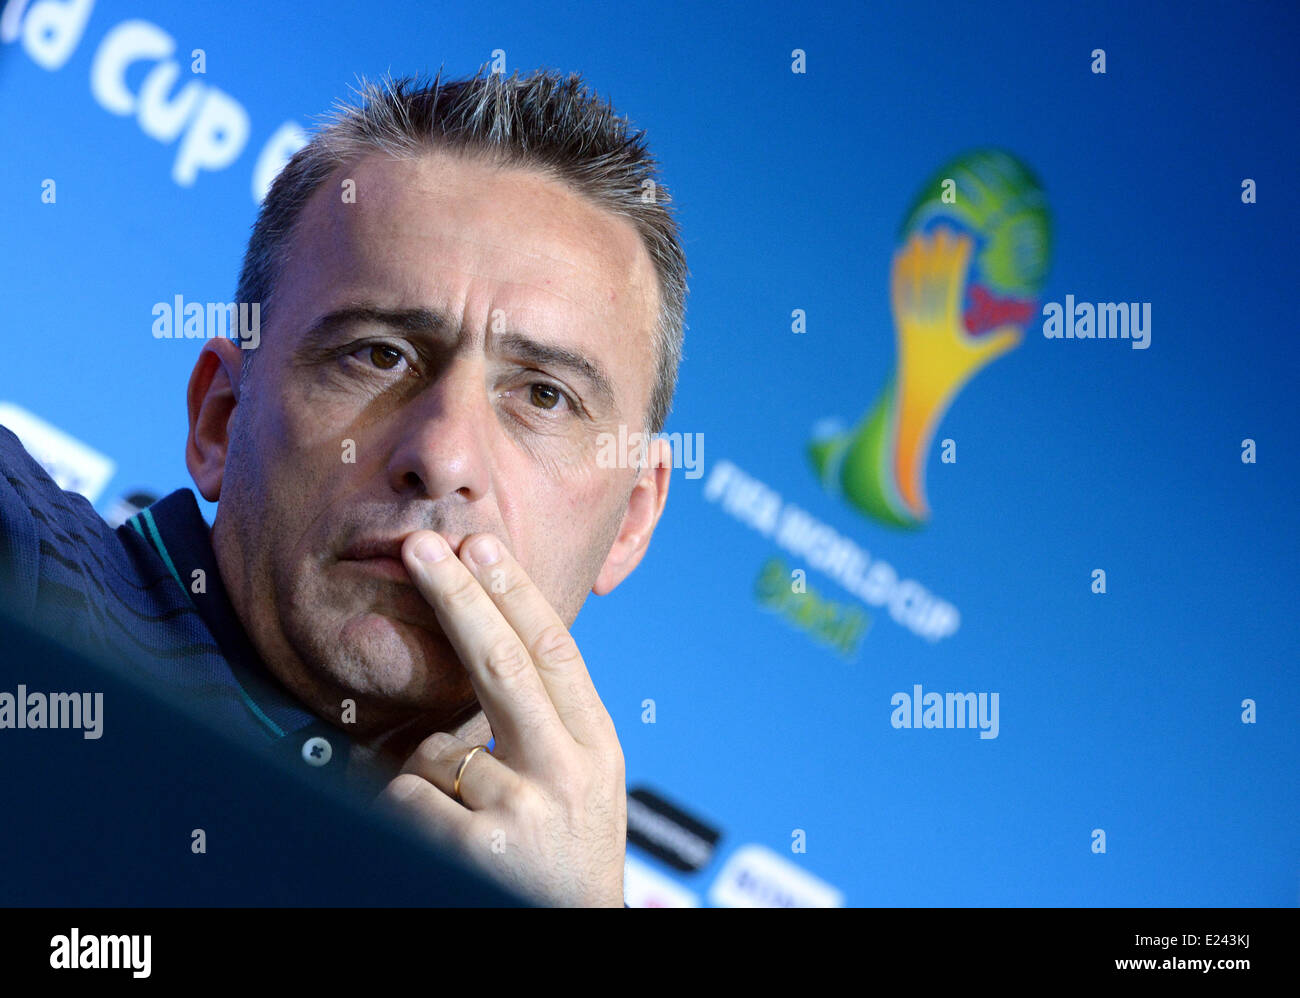 Salvador da Bahia, Brazil. 15th June, 2014. Head coach Paulo Bento seen during a press conference of the Portugal's national soccer team at the Arena Fonte Nova Stadium in Salvador da Bahia, Brazil, 15 June 2014. Germany will face Portugal in their group G preliminary round match at the FIFA World Cup 2014 on 16 June 2014 in Salvador da Bahia. Photo: Andreas Gebertt/dpa/Alamy Live News Stock Photo